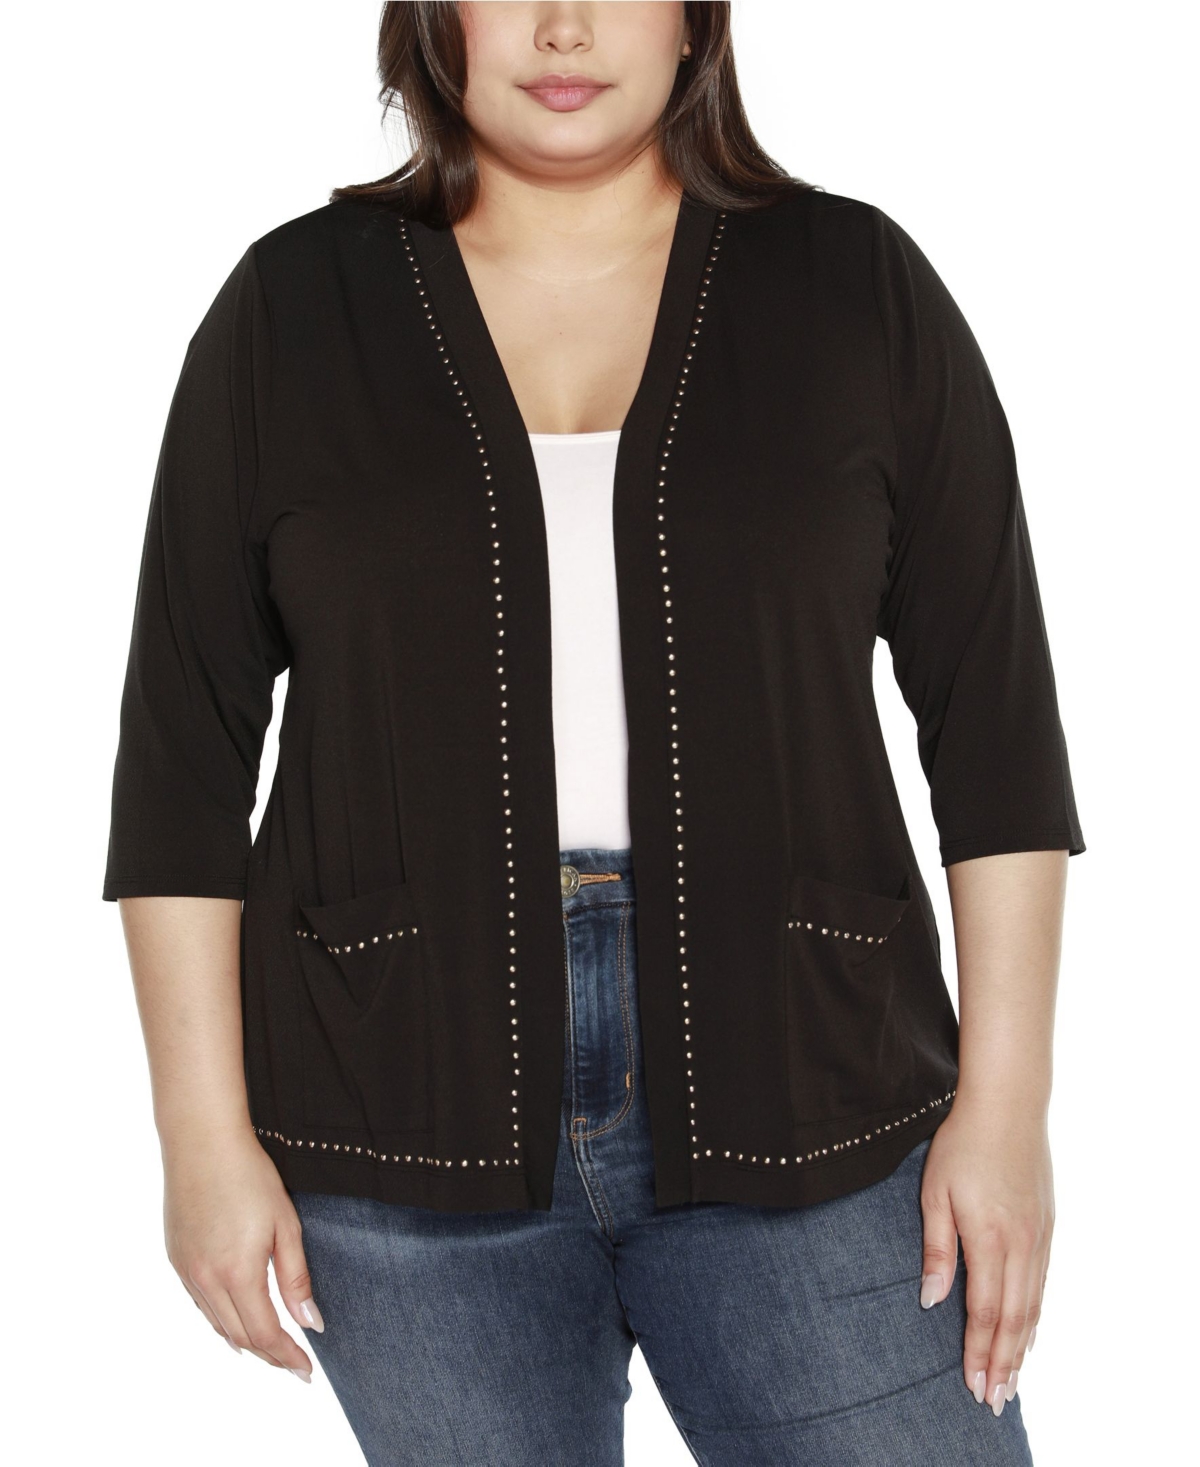 Shop Belldini Black Label Plus Size Embellished Open-front Knit Cardigan Sweater